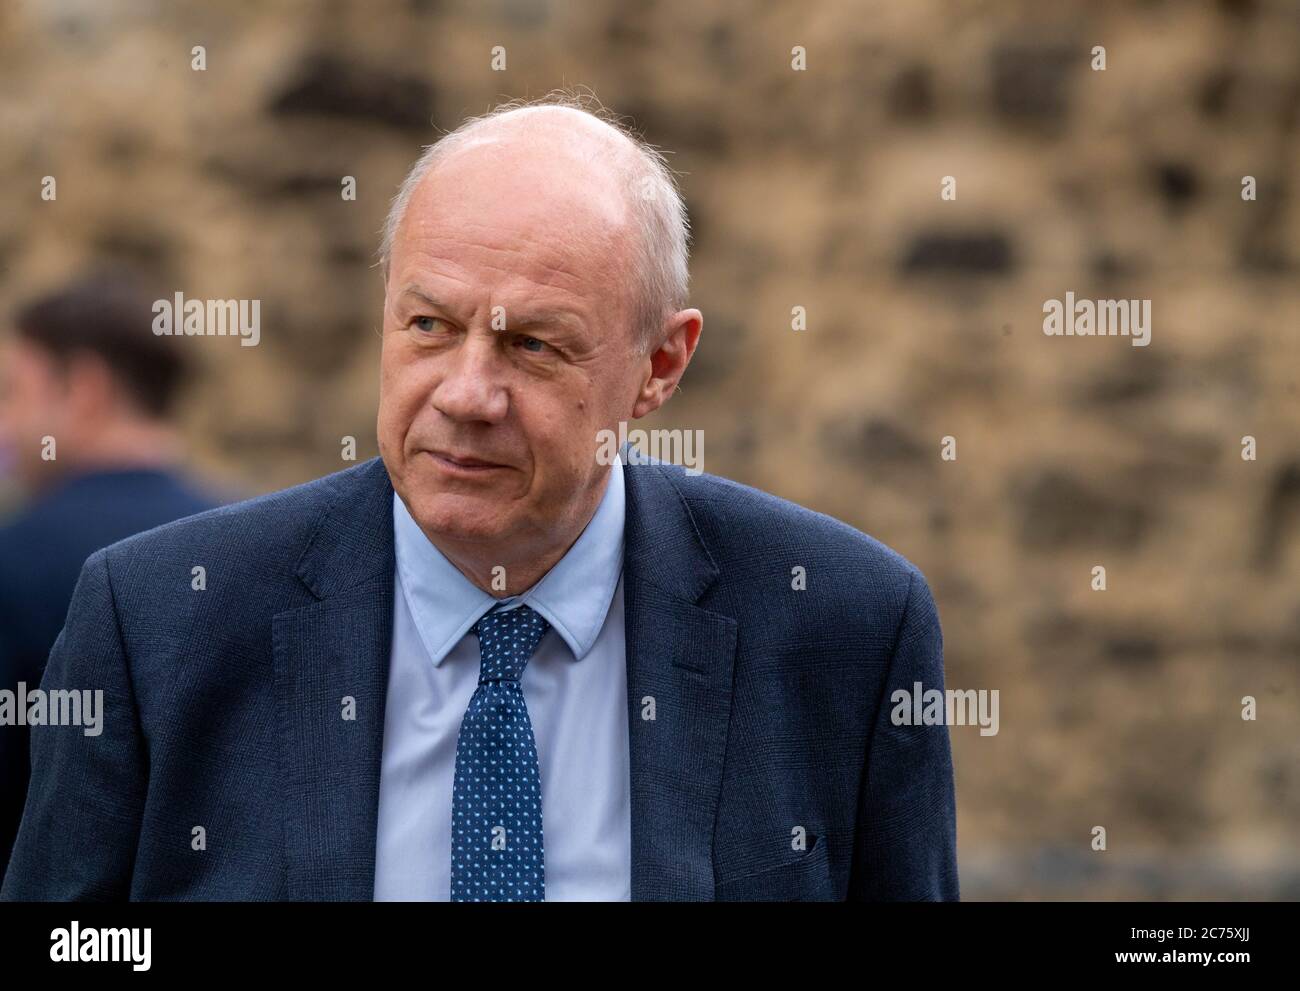 London, UK. 14th July, 2020. MP's in Westminster Damian Green Conservative MP for Ashford being interviewed on College Green, Westminster London Credit: Ian Davidson/Alamy Live News Stock Photo